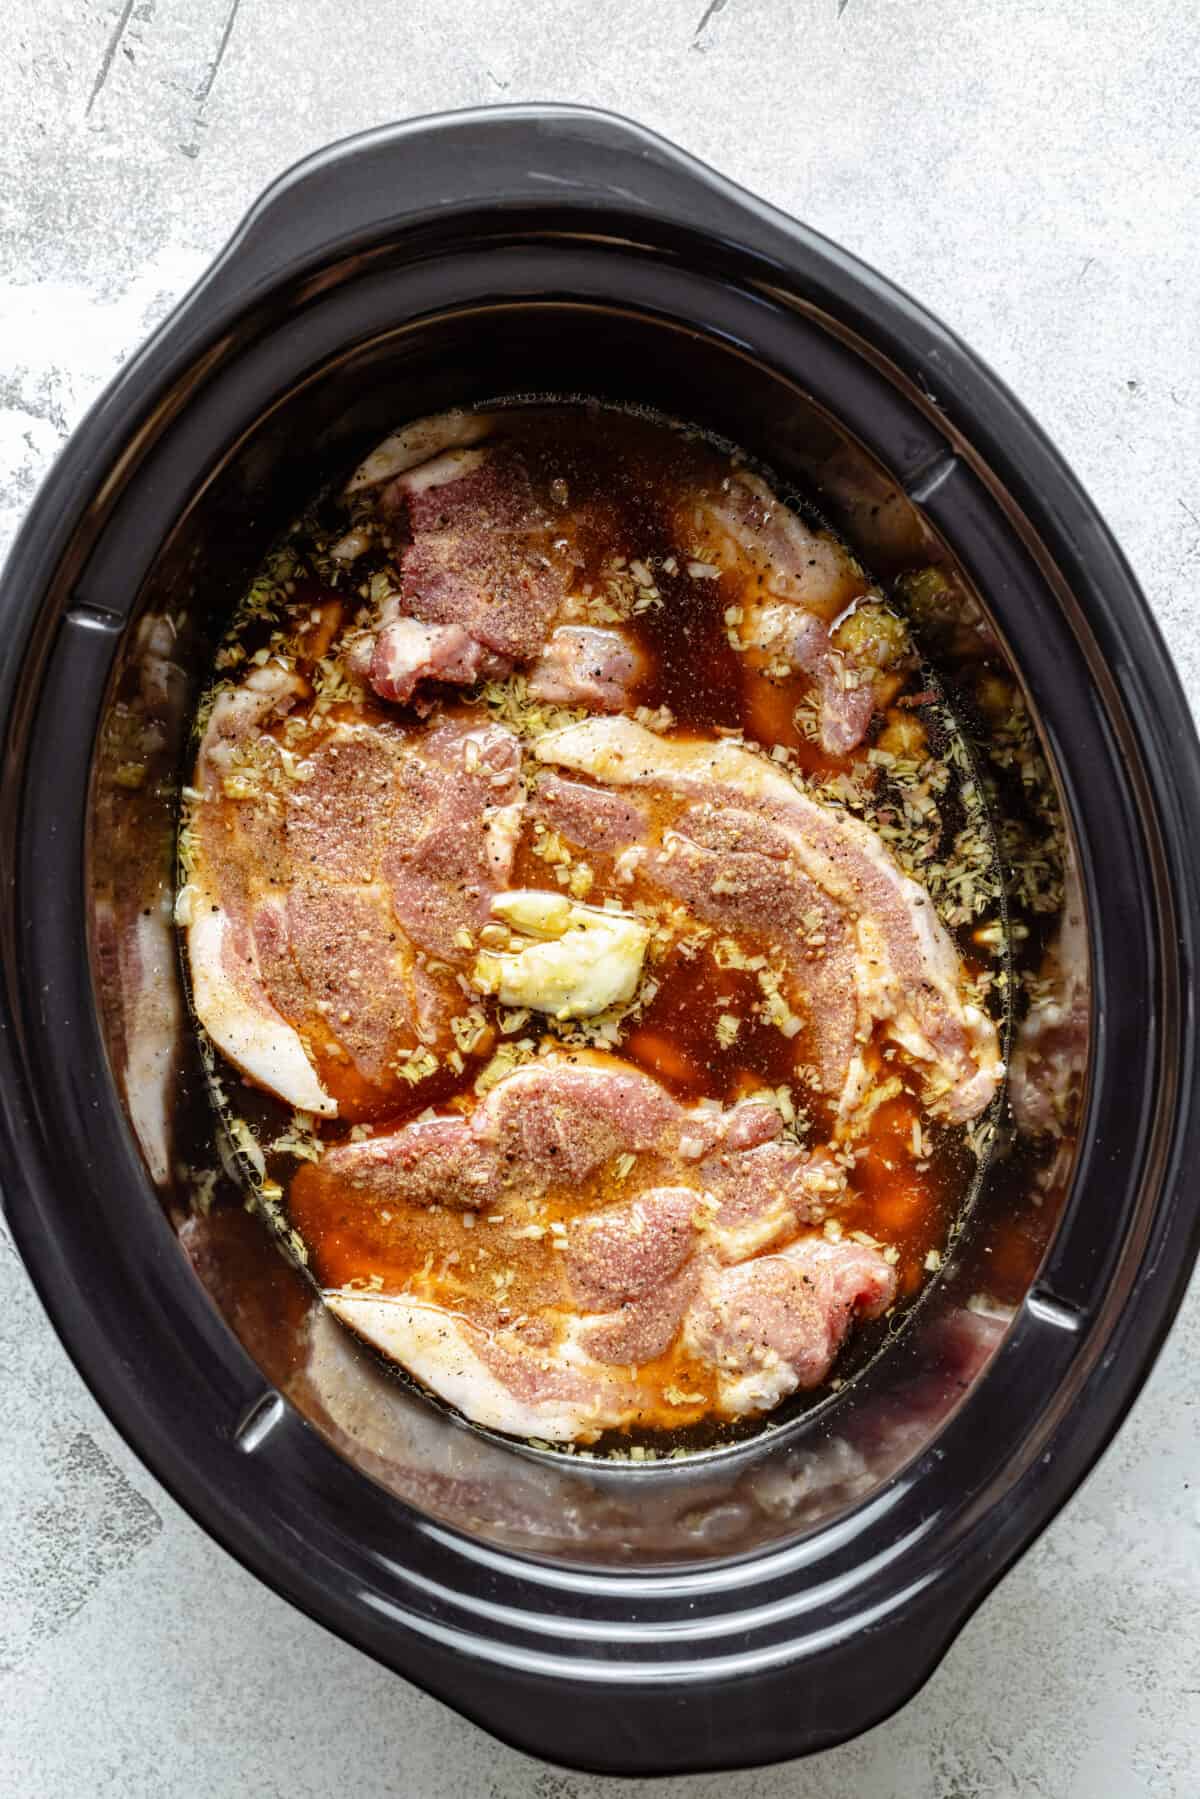 Raw pork and other ingredients in slow cooker.